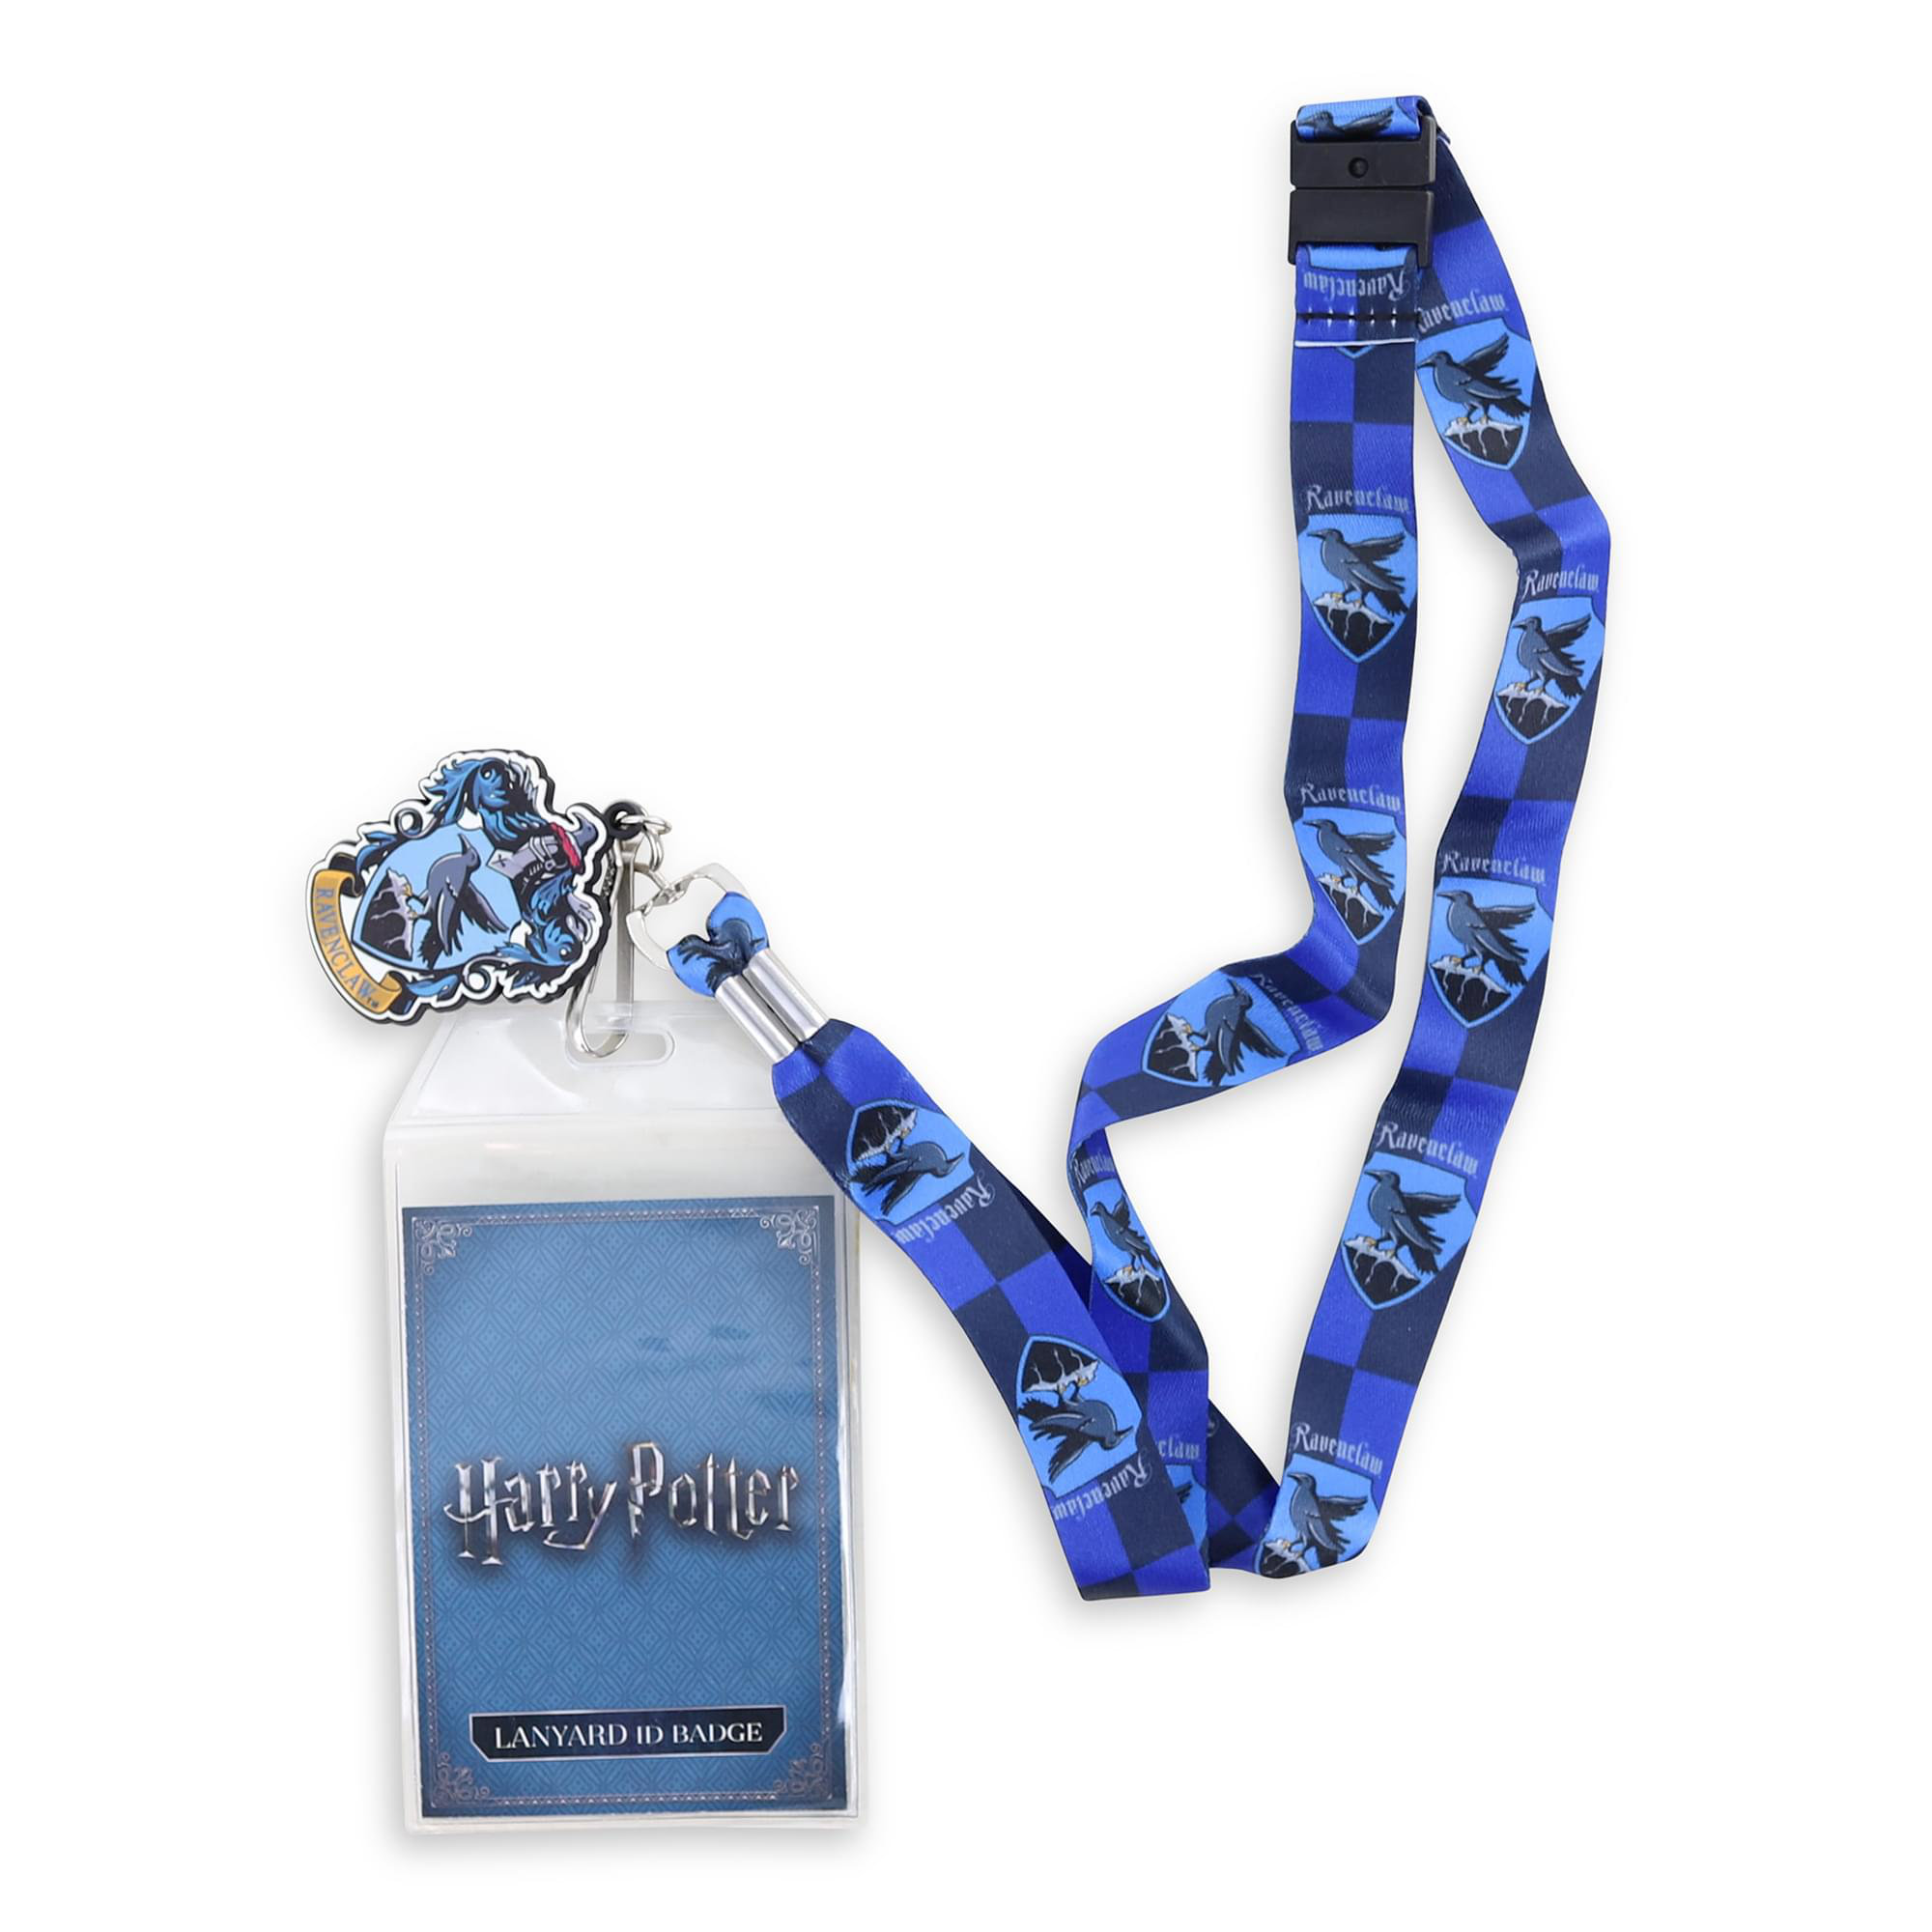 Ravenclaw House Picture, House Pictures 2023-2024